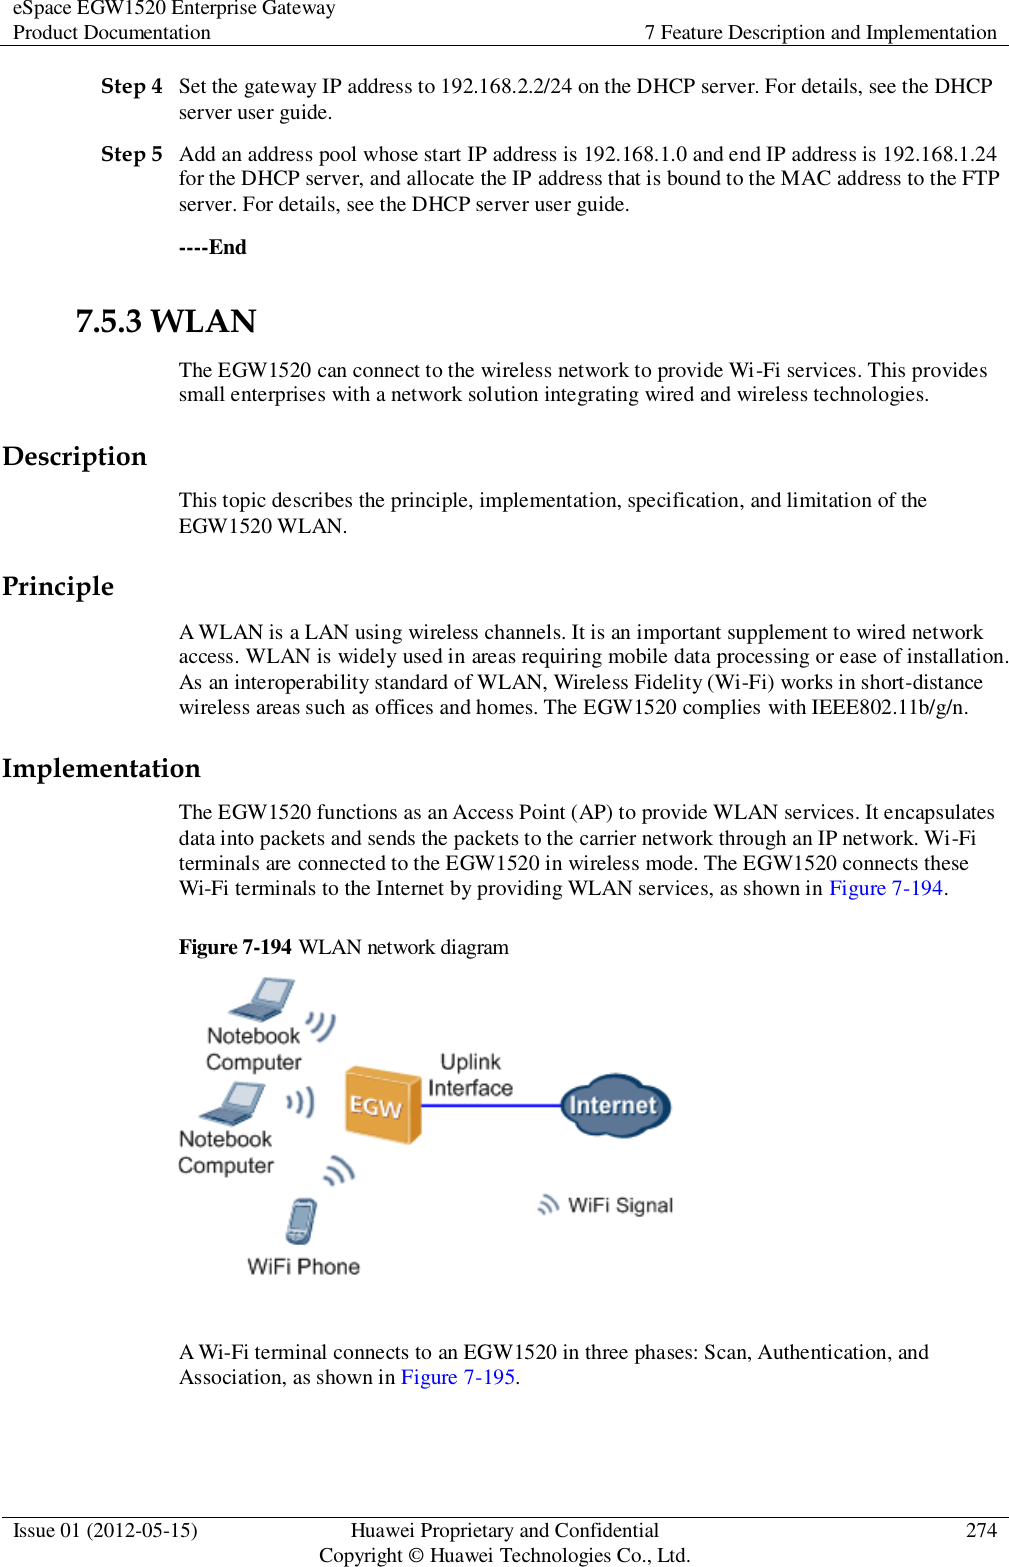 eSpace EGW1520 Enterprise Gateway Product Documentation 7 Feature Description and Implementation  Issue 01 (2012-05-15) Huawei Proprietary and Confidential                                     Copyright © Huawei Technologies Co., Ltd. 274  Step 4 Set the gateway IP address to 192.168.2.2/24 on the DHCP server. For details, see the DHCP server user guide. Step 5 Add an address pool whose start IP address is 192.168.1.0 and end IP address is 192.168.1.24 for the DHCP server, and allocate the IP address that is bound to the MAC address to the FTP server. For details, see the DHCP server user guide. ----End 7.5.3 WLAN The EGW1520 can connect to the wireless network to provide Wi-Fi services. This provides small enterprises with a network solution integrating wired and wireless technologies. Description This topic describes the principle, implementation, specification, and limitation of the EGW1520 WLAN. Principle A WLAN is a LAN using wireless channels. It is an important supplement to wired network access. WLAN is widely used in areas requiring mobile data processing or ease of installation. As an interoperability standard of WLAN, Wireless Fidelity (Wi-Fi) works in short-distance wireless areas such as offices and homes. The EGW1520 complies with IEEE802.11b/g/n. Implementation The EGW1520 functions as an Access Point (AP) to provide WLAN services. It encapsulates data into packets and sends the packets to the carrier network through an IP network. Wi-Fi terminals are connected to the EGW1520 in wireless mode. The EGW1520 connects these Wi-Fi terminals to the Internet by providing WLAN services, as shown in Figure 7-194. Figure 7-194 WLAN network diagram   A Wi-Fi terminal connects to an EGW1520 in three phases: Scan, Authentication, and Association, as shown in Figure 7-195. 